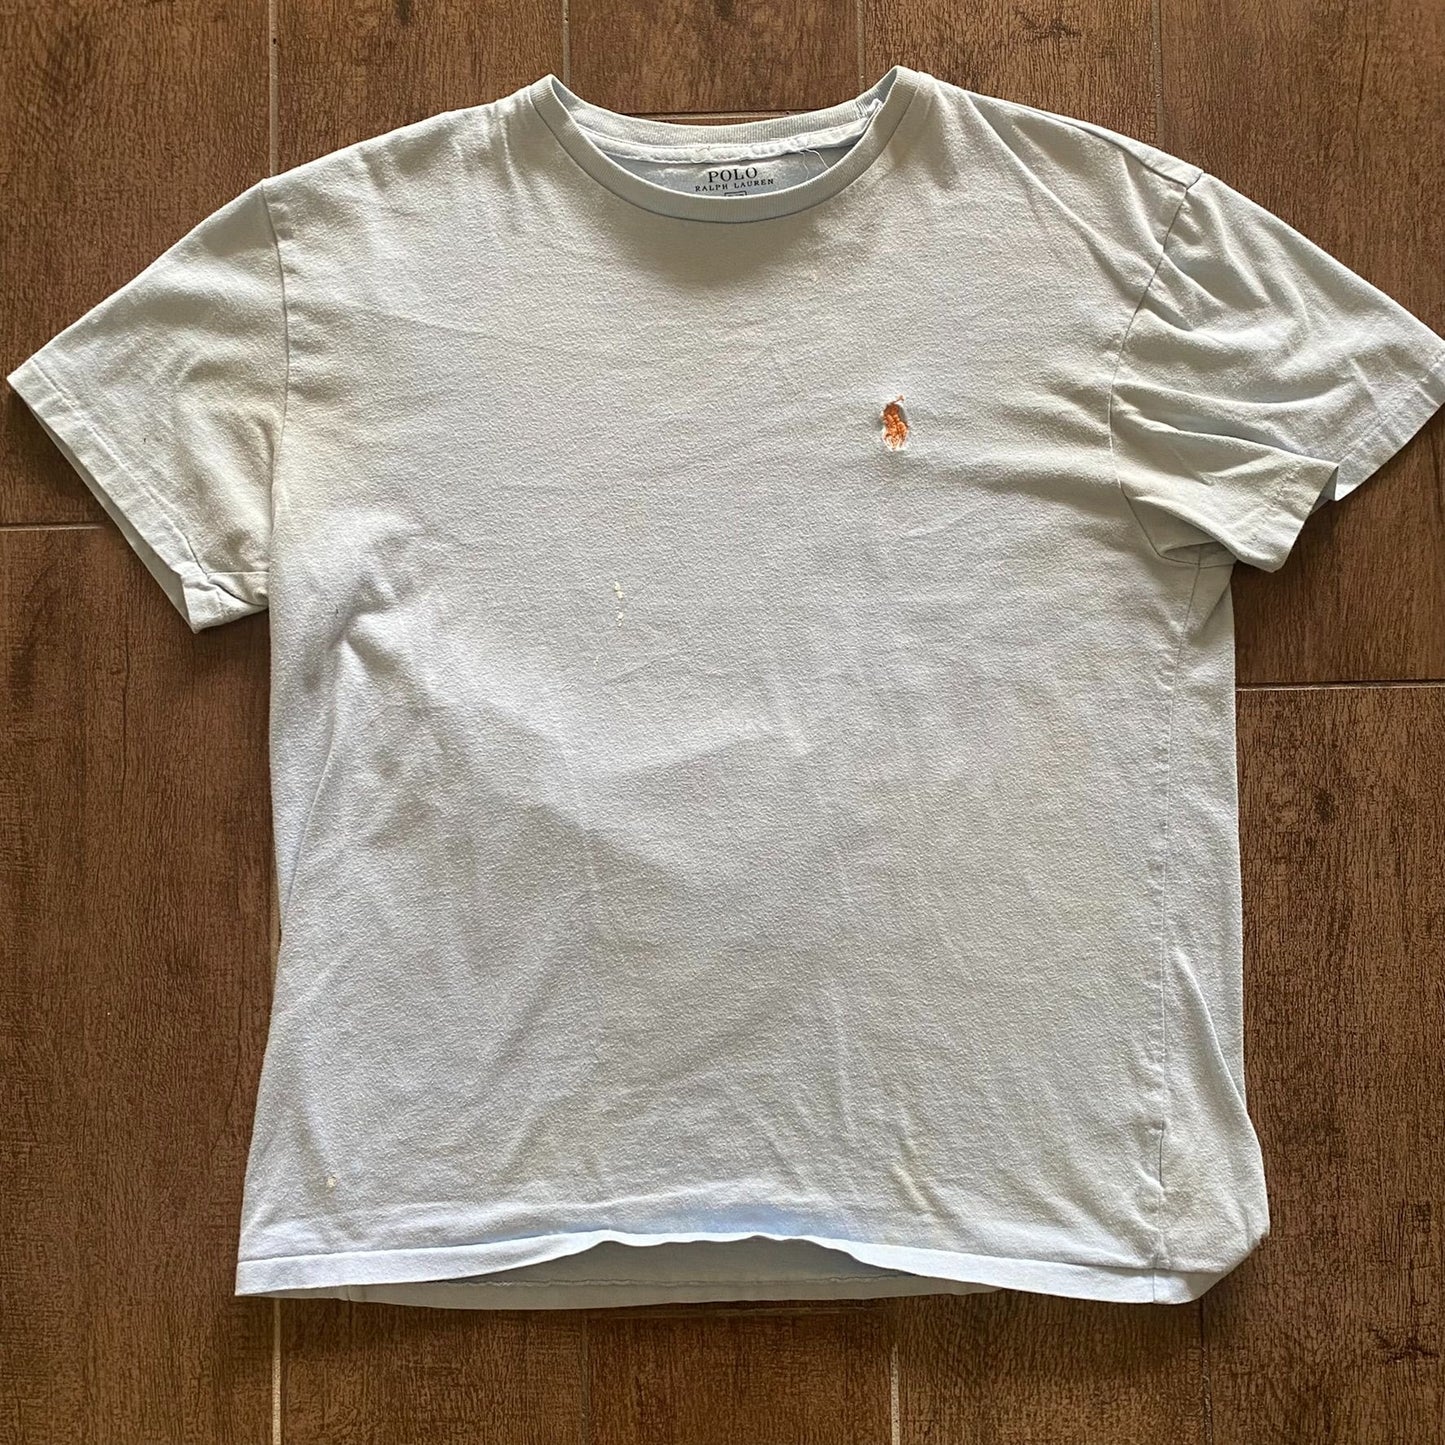 Distressed Painted Polo Ralph Lauren T-Shirt